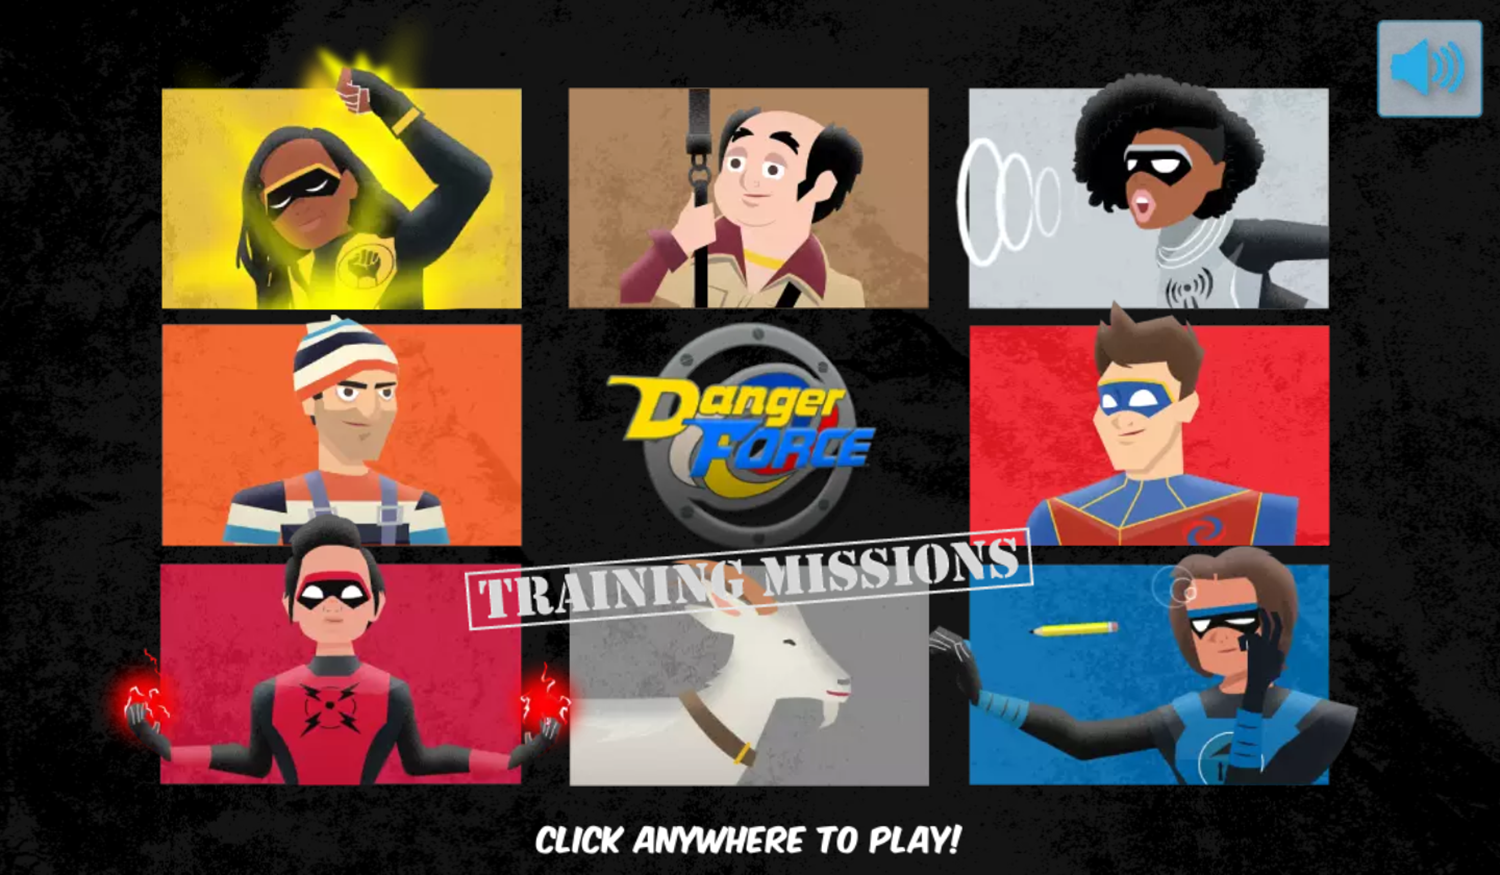 Danger Force Training Missions Game Welcome Screen Screenshot.